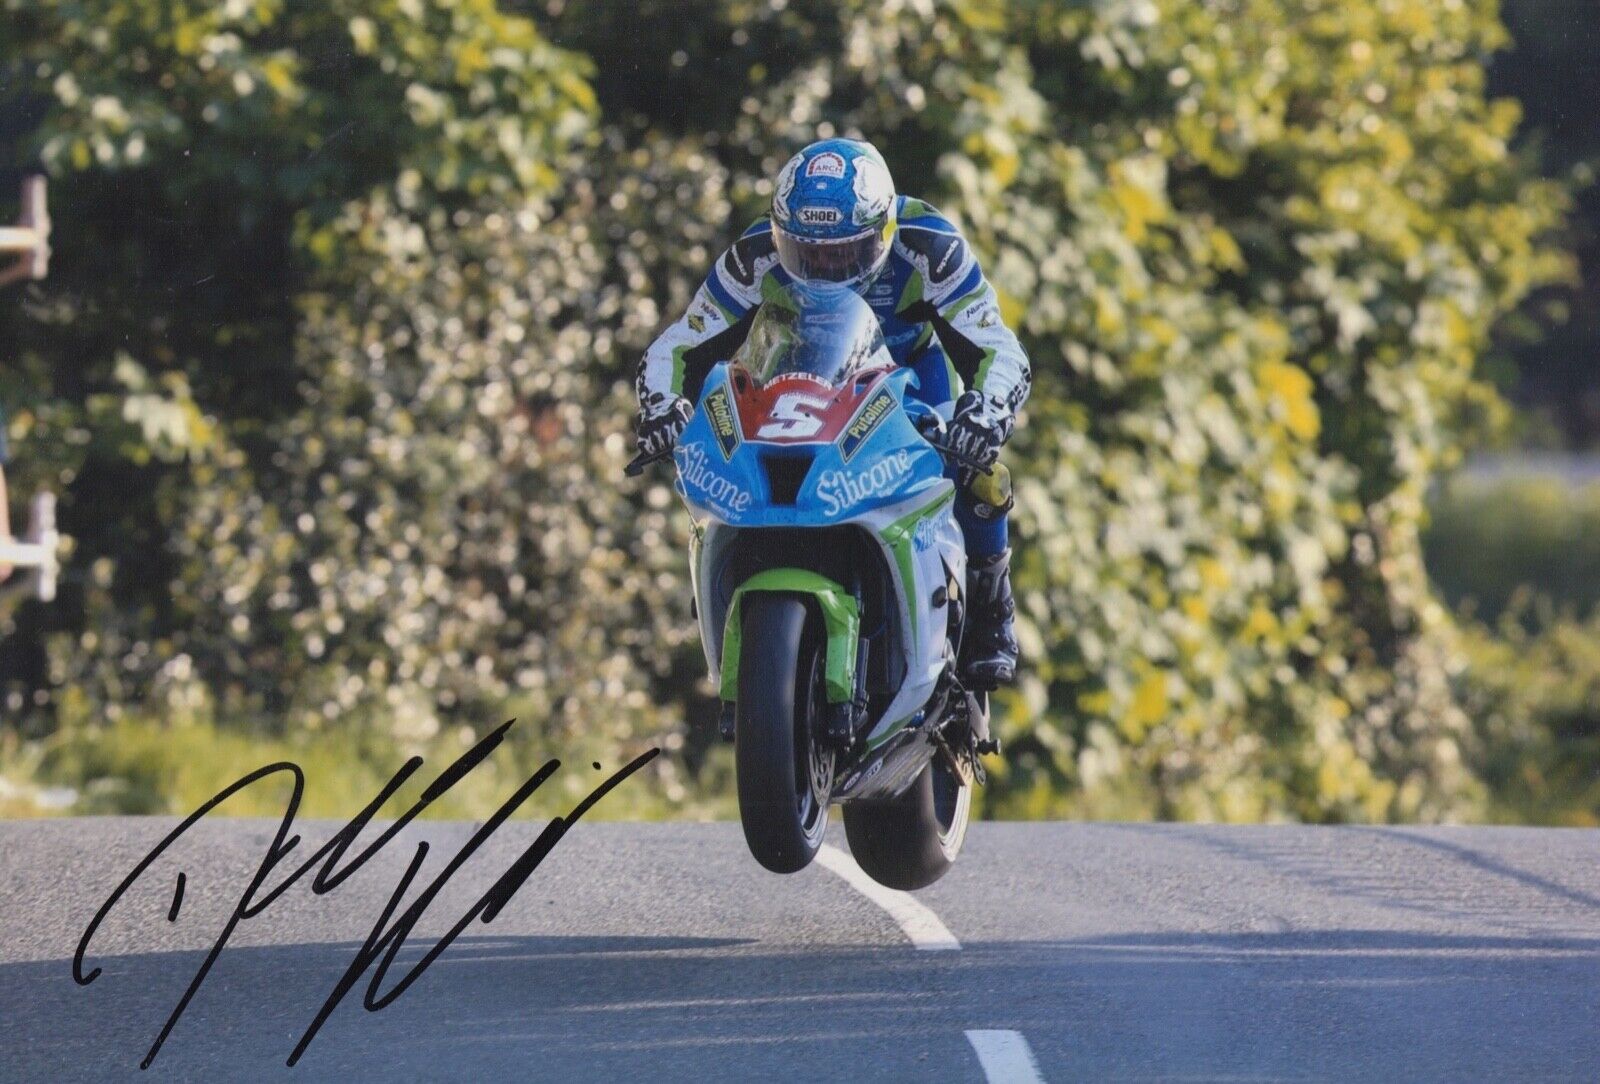 DEAN HARRISON HAND SIGNED 12X8 Photo Poster painting ISLE OF MAN TT AUTOGRAPH 16